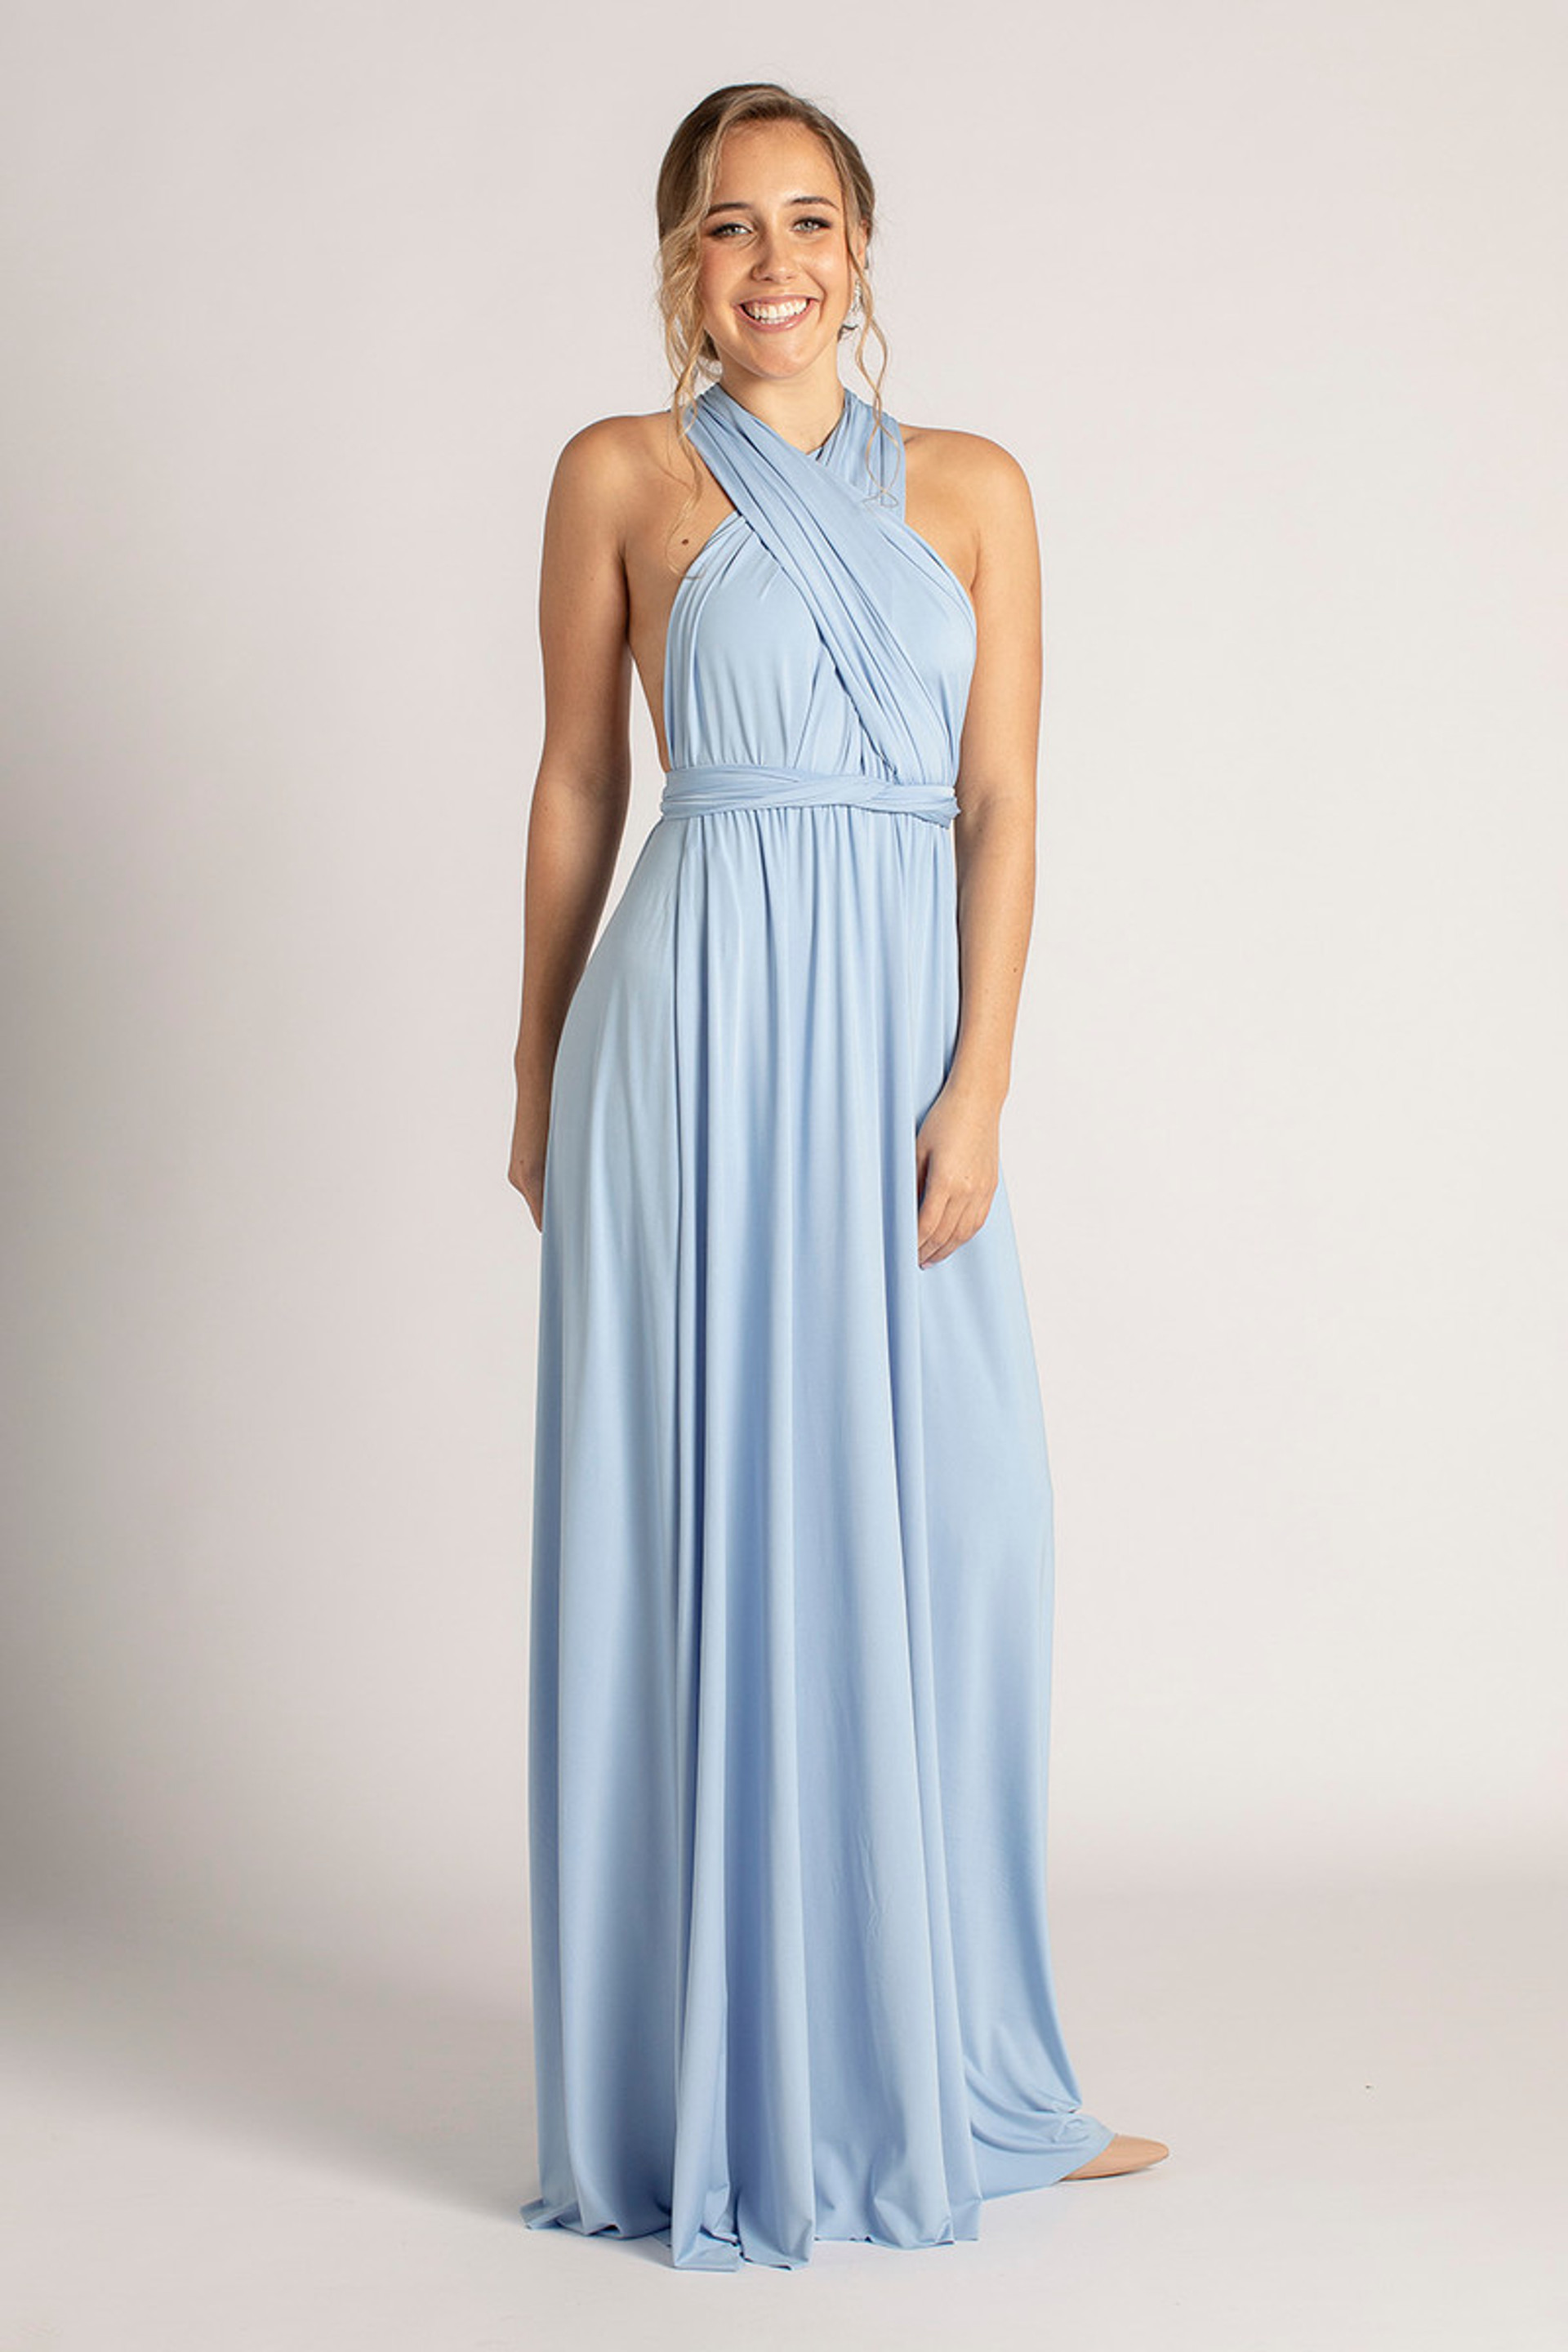 Classic Multiway Infinity Bridesmaid Dress in Cornflower Blue For Sale ...